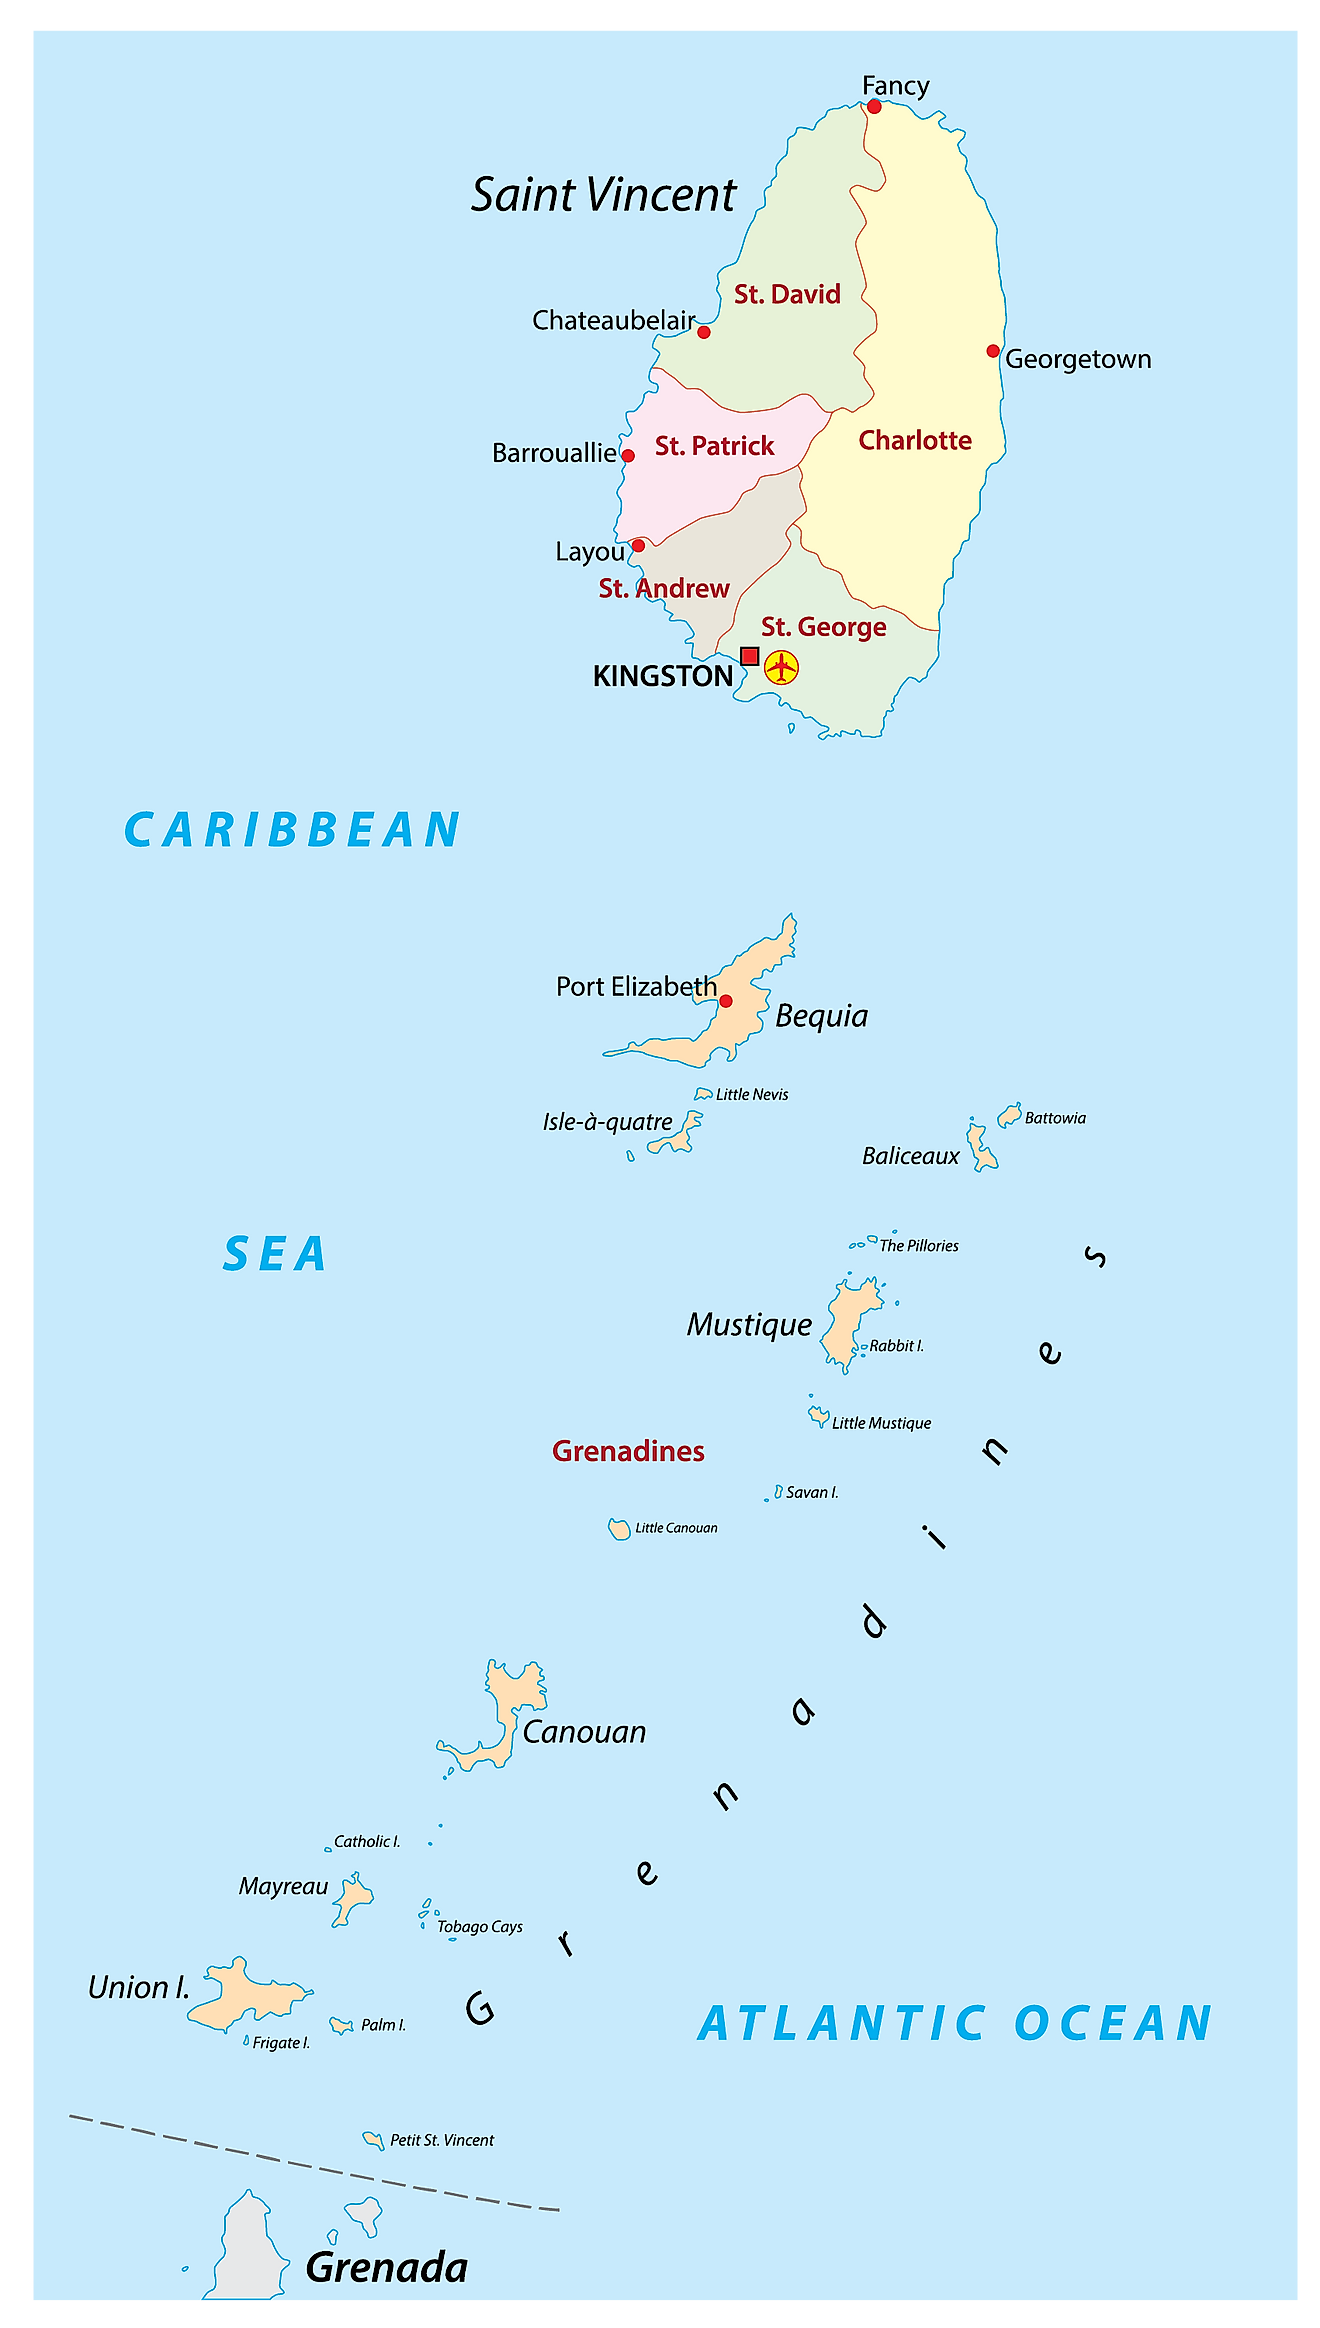 Political Map of St. Vincent and the Grenadines showing its 6 parishes and the capital city of Kingstown.